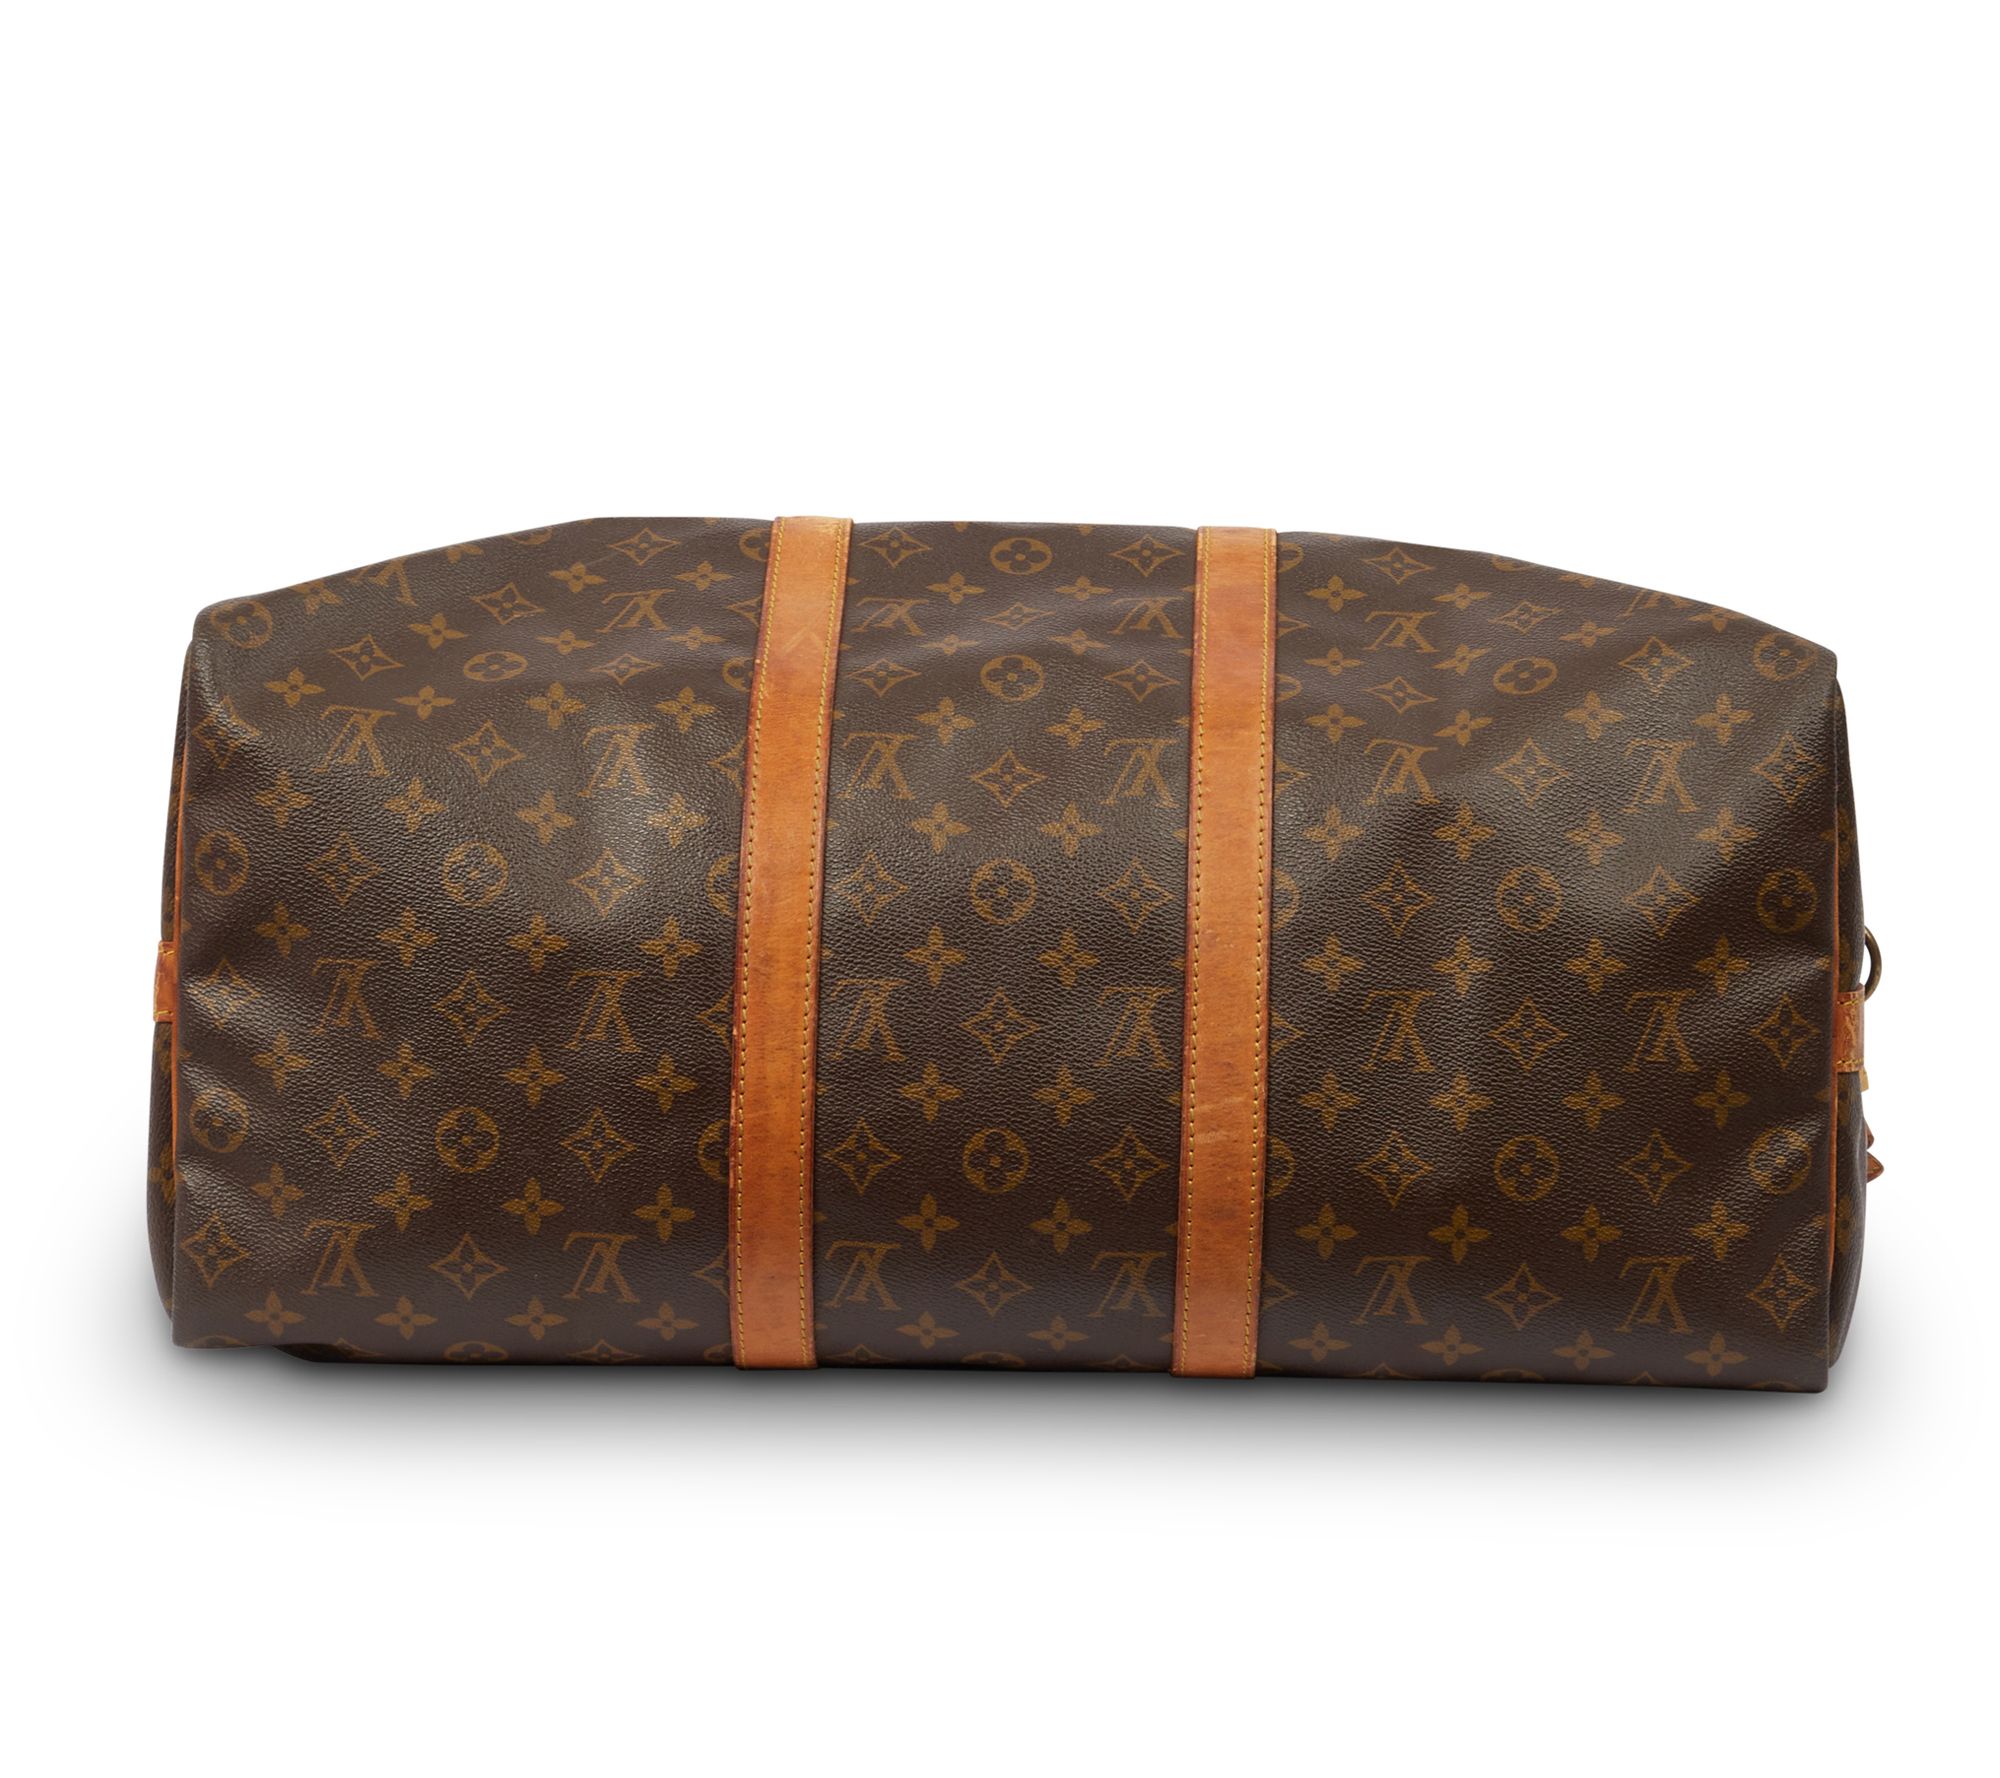 Pre-Owned Louis Vuitton Keepall Bandouliere Monogram 50 Brow2